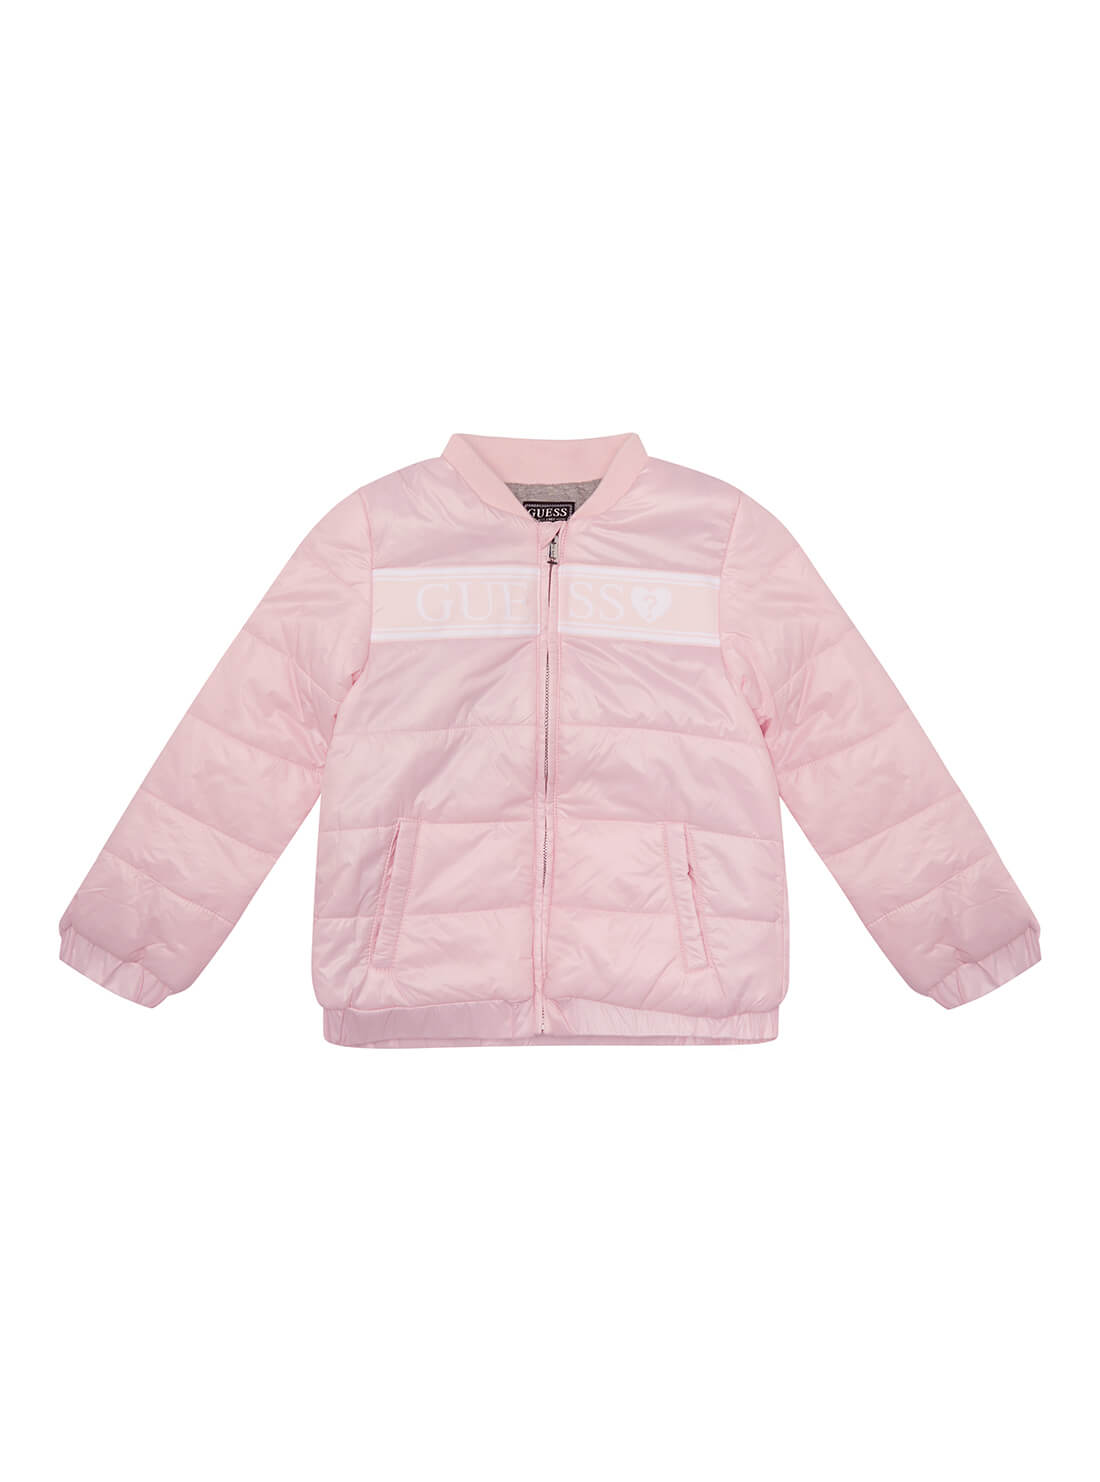 GUESS Kids Ballet Pink Bomber Jacket (2-7) Front View